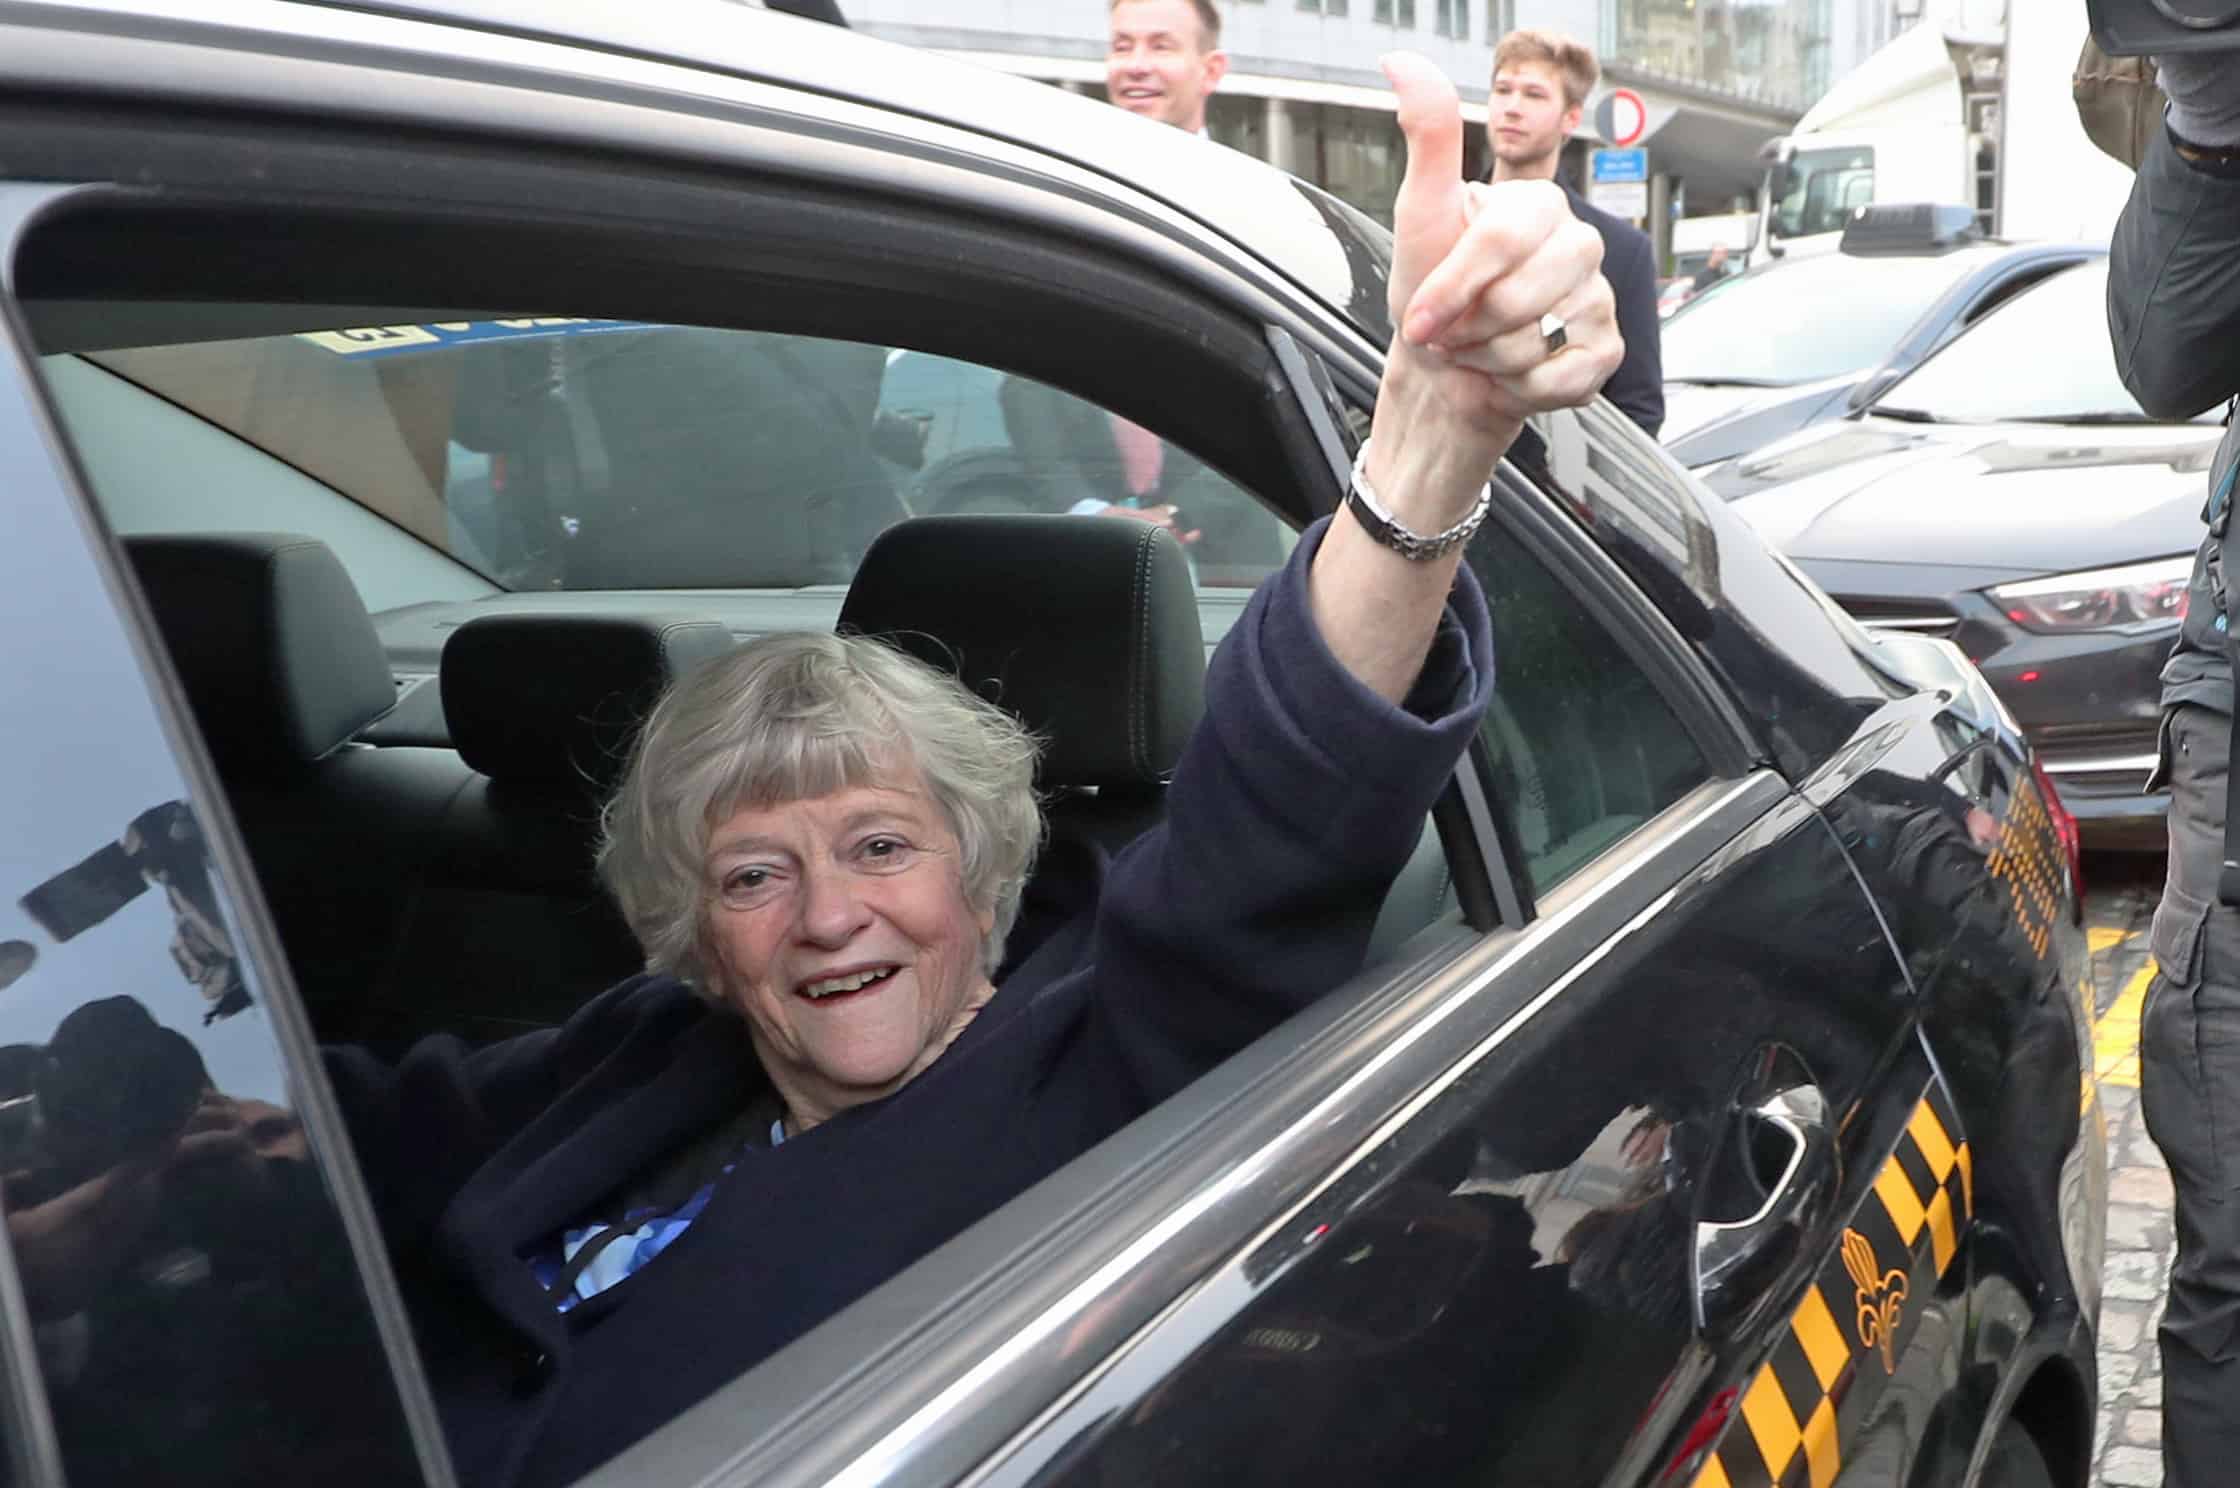 ‘Mask dissenter’ Ann Widdecombe wants to shop ‘unmuzzled’